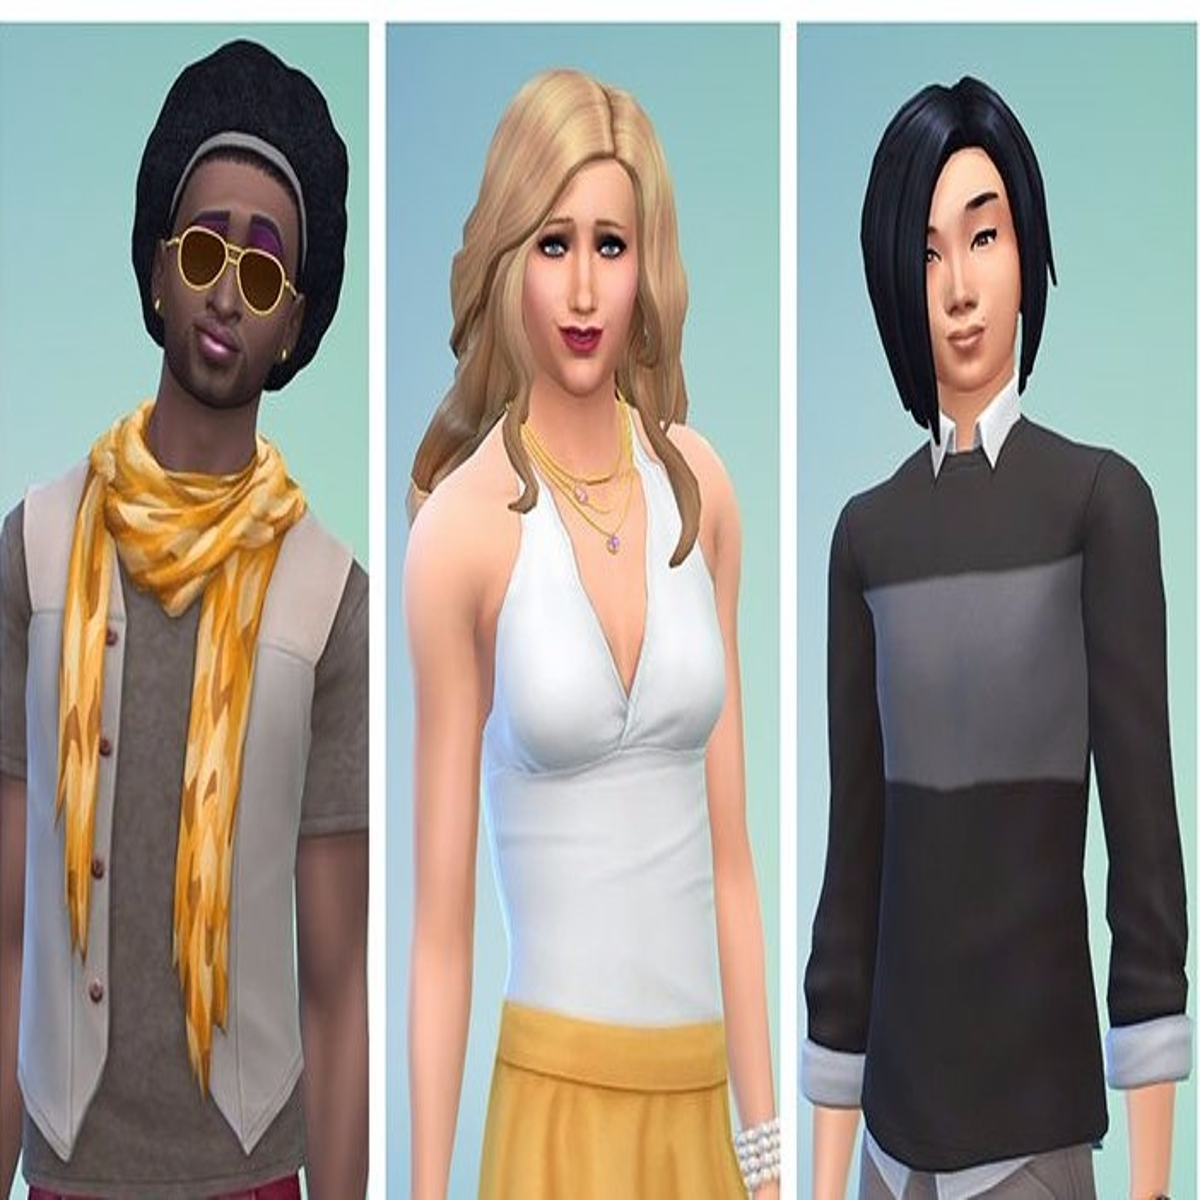 Why 'The Sims' Trans-Inclusive Update Means So Much to Me